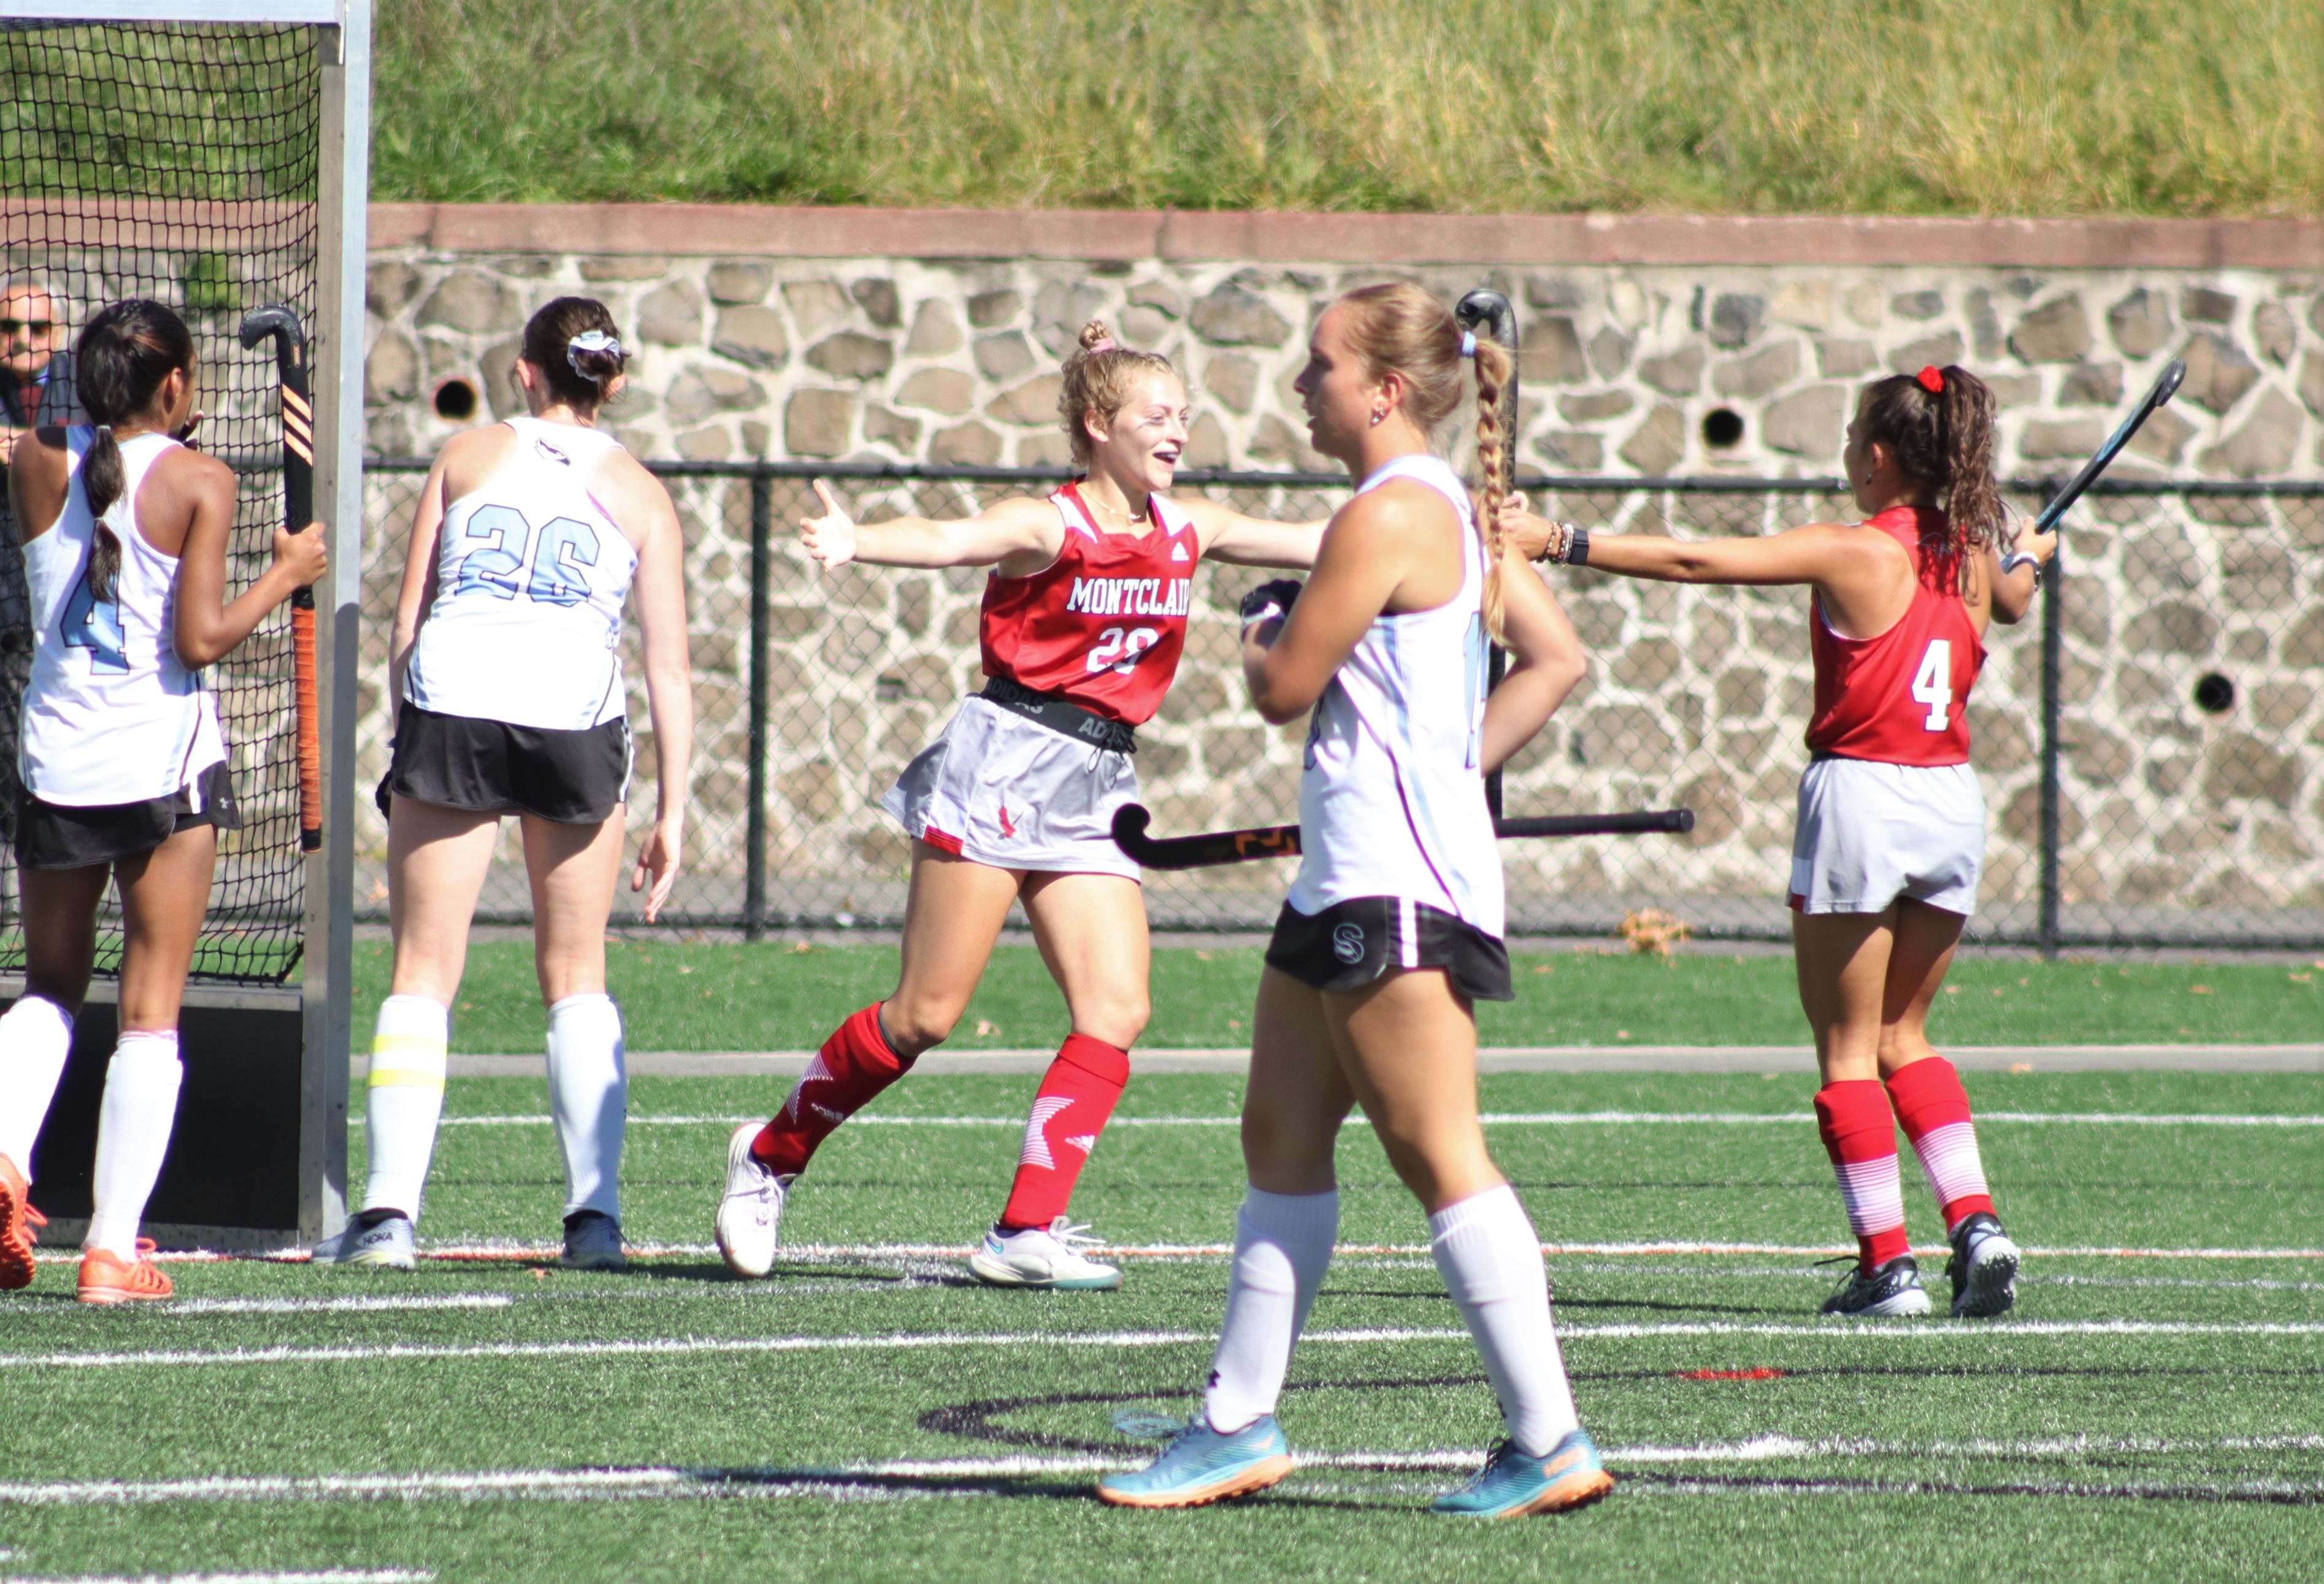 Carlie Van Tassel scored the first goal of the game and the sixth goal of the season for herself. Trevor Giesberg | The Montclarion